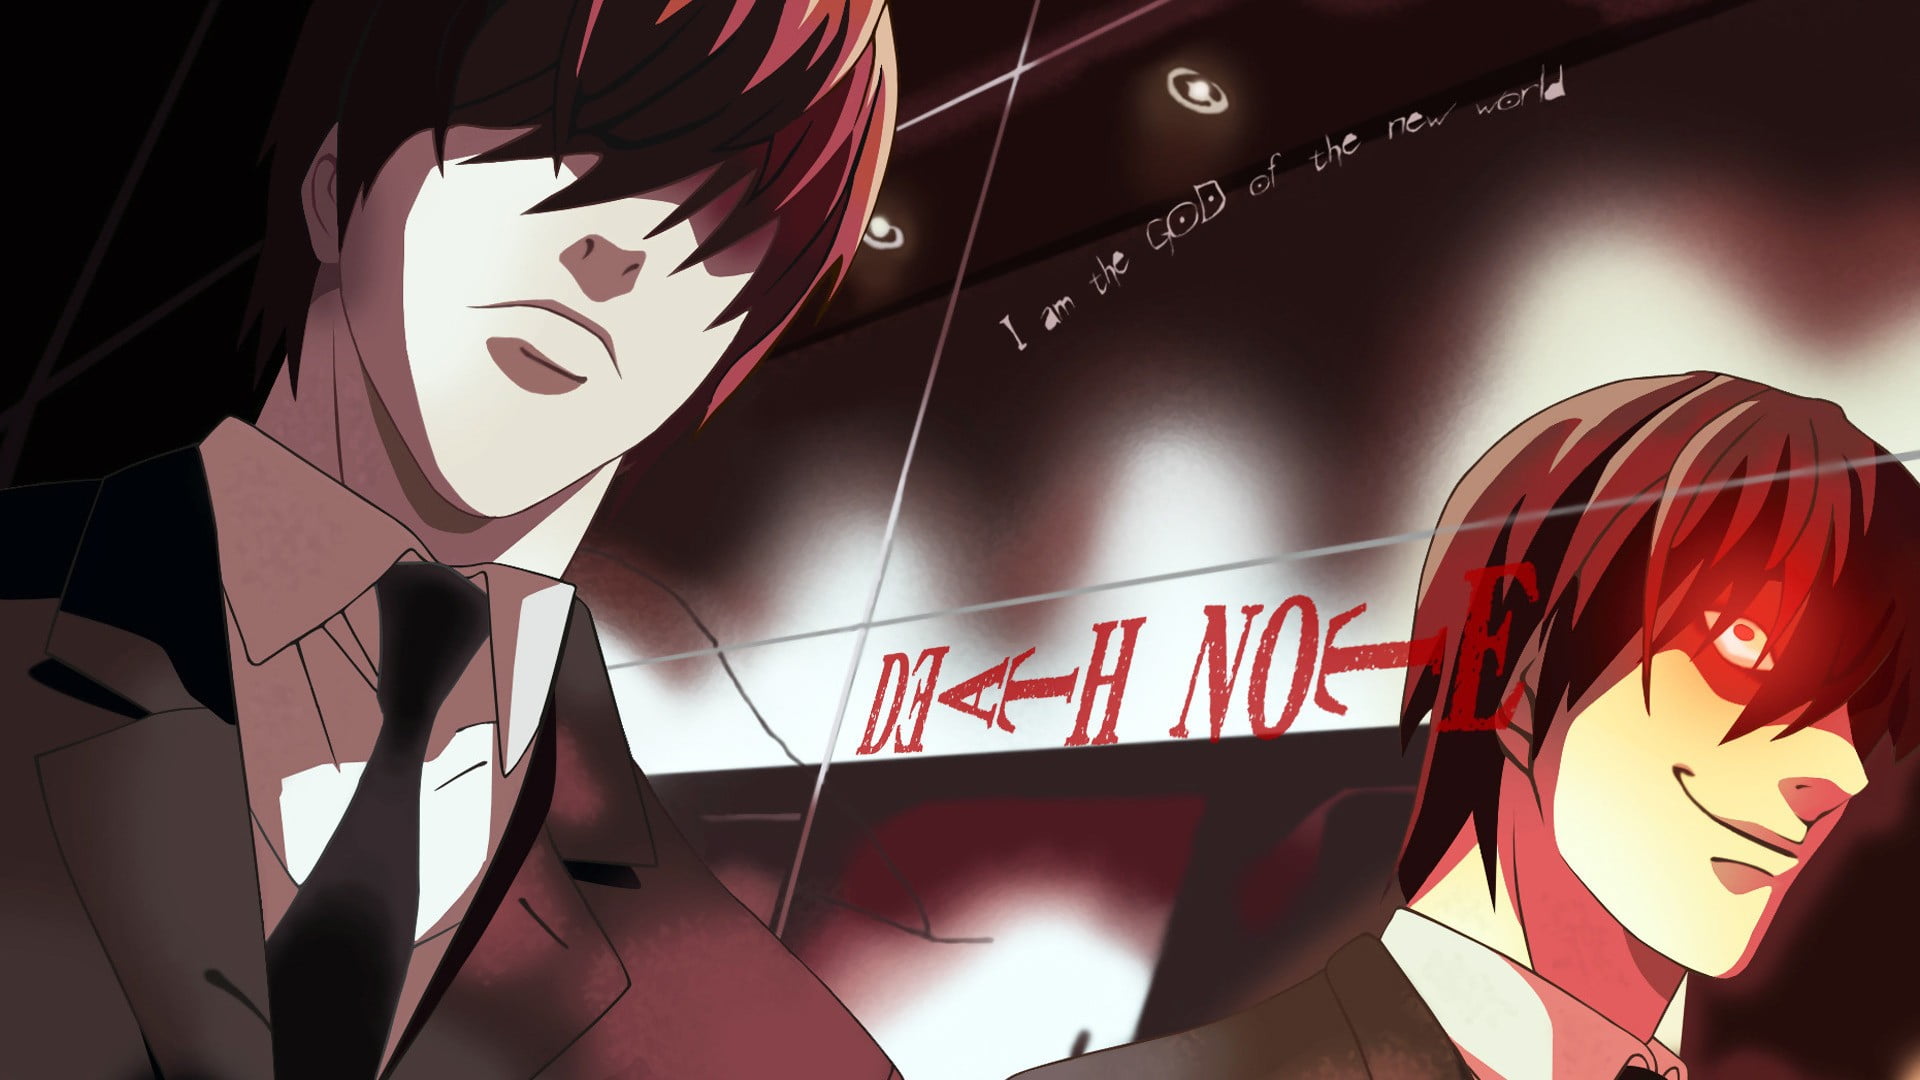 Deathnote digital wallpaper, anime, Death Note, red, text, communication